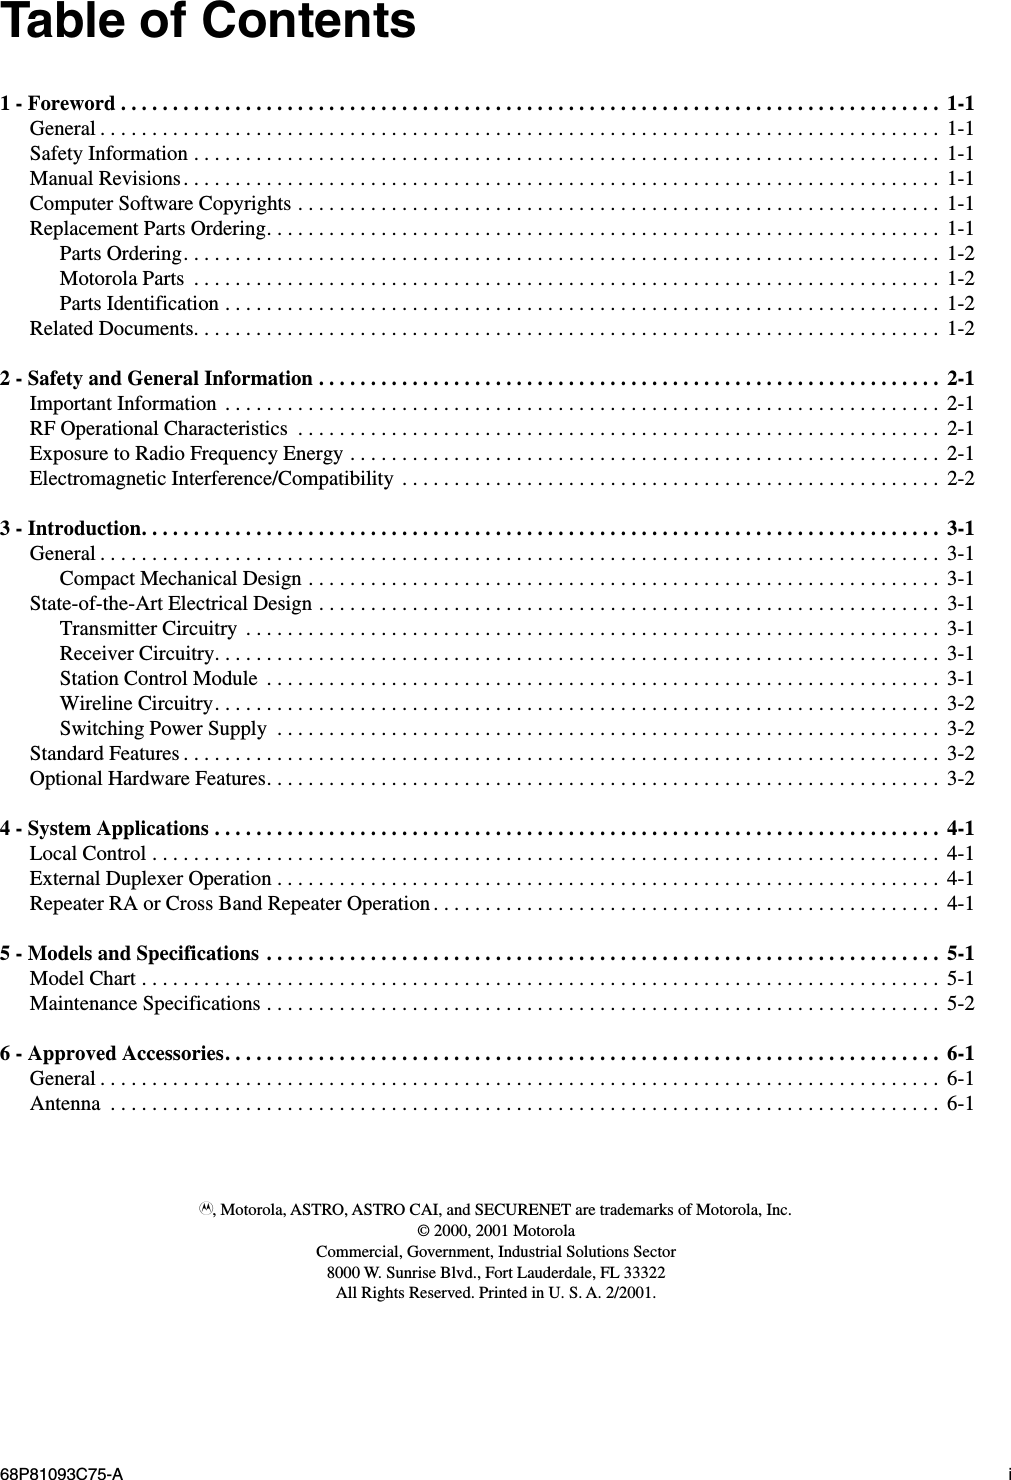  68P81093C75-A i Table of Contents 1 - Foreword . . . . . . . . . . . . . . . . . . . . . . . . . . . . . . . . . . . . . . . . . . . . . . . . . . . . . . . . . . . . . . . . . . . . . . . . . . . . . . .  1-1 General . . . . . . . . . . . . . . . . . . . . . . . . . . . . . . . . . . . . . . . . . . . . . . . . . . . . . . . . . . . . . . . . . . . . . . . . . . . . . . . . .  1-1Safety Information . . . . . . . . . . . . . . . . . . . . . . . . . . . . . . . . . . . . . . . . . . . . . . . . . . . . . . . . . . . . . . . . . . . . . . . .  1-1Manual Revisions. . . . . . . . . . . . . . . . . . . . . . . . . . . . . . . . . . . . . . . . . . . . . . . . . . . . . . . . . . . . . . . . . . . . . . . . .  1-1Computer Software Copyrights . . . . . . . . . . . . . . . . . . . . . . . . . . . . . . . . . . . . . . . . . . . . . . . . . . . . . . . . . . . . . .  1-1Replacement Parts Ordering. . . . . . . . . . . . . . . . . . . . . . . . . . . . . . . . . . . . . . . . . . . . . . . . . . . . . . . . . . . . . . . . .  1-1Parts Ordering. . . . . . . . . . . . . . . . . . . . . . . . . . . . . . . . . . . . . . . . . . . . . . . . . . . . . . . . . . . . . . . . . . . . . . . . .  1-2Motorola Parts  . . . . . . . . . . . . . . . . . . . . . . . . . . . . . . . . . . . . . . . . . . . . . . . . . . . . . . . . . . . . . . . . . . . . . . . .  1-2Parts Identification . . . . . . . . . . . . . . . . . . . . . . . . . . . . . . . . . . . . . . . . . . . . . . . . . . . . . . . . . . . . . . . . . . . . .  1-2Related Documents. . . . . . . . . . . . . . . . . . . . . . . . . . . . . . . . . . . . . . . . . . . . . . . . . . . . . . . . . . . . . . . . . . . . . . . .  1-2 2 - Safety and General Information . . . . . . . . . . . . . . . . . . . . . . . . . . . . . . . . . . . . . . . . . . . . . . . . . . . . . . . . . . . .  2-1 Important Information  . . . . . . . . . . . . . . . . . . . . . . . . . . . . . . . . . . . . . . . . . . . . . . . . . . . . . . . . . . . . . . . . . . . . .  2-1RF Operational Characteristics  . . . . . . . . . . . . . . . . . . . . . . . . . . . . . . . . . . . . . . . . . . . . . . . . . . . . . . . . . . . . . .  2-1Exposure to Radio Frequency Energy . . . . . . . . . . . . . . . . . . . . . . . . . . . . . . . . . . . . . . . . . . . . . . . . . . . . . . . . .  2-1Electromagnetic Interference/Compatibility  . . . . . . . . . . . . . . . . . . . . . . . . . . . . . . . . . . . . . . . . . . . . . . . . . . . .  2-2 3 - Introduction. . . . . . . . . . . . . . . . . . . . . . . . . . . . . . . . . . . . . . . . . . . . . . . . . . . . . . . . . . . . . . . . . . . . . . . . . . . . .  3-1 General . . . . . . . . . . . . . . . . . . . . . . . . . . . . . . . . . . . . . . . . . . . . . . . . . . . . . . . . . . . . . . . . . . . . . . . . . . . . . . . . .  3-1Compact Mechanical Design . . . . . . . . . . . . . . . . . . . . . . . . . . . . . . . . . . . . . . . . . . . . . . . . . . . . . . . . . . . . .  3-1State-of-the-Art Electrical Design . . . . . . . . . . . . . . . . . . . . . . . . . . . . . . . . . . . . . . . . . . . . . . . . . . . . . . . . . . . .  3-1Transmitter Circuitry  . . . . . . . . . . . . . . . . . . . . . . . . . . . . . . . . . . . . . . . . . . . . . . . . . . . . . . . . . . . . . . . . . . .  3-1Receiver Circuitry. . . . . . . . . . . . . . . . . . . . . . . . . . . . . . . . . . . . . . . . . . . . . . . . . . . . . . . . . . . . . . . . . . . . . .  3-1Station Control Module  . . . . . . . . . . . . . . . . . . . . . . . . . . . . . . . . . . . . . . . . . . . . . . . . . . . . . . . . . . . . . . . . .  3-1Wireline Circuitry. . . . . . . . . . . . . . . . . . . . . . . . . . . . . . . . . . . . . . . . . . . . . . . . . . . . . . . . . . . . . . . . . . . . . .  3-2Switching Power Supply  . . . . . . . . . . . . . . . . . . . . . . . . . . . . . . . . . . . . . . . . . . . . . . . . . . . . . . . . . . . . . . . .  3-2Standard Features . . . . . . . . . . . . . . . . . . . . . . . . . . . . . . . . . . . . . . . . . . . . . . . . . . . . . . . . . . . . . . . . . . . . . . . . .  3-2Optional Hardware Features. . . . . . . . . . . . . . . . . . . . . . . . . . . . . . . . . . . . . . . . . . . . . . . . . . . . . . . . . . . . . . . . .  3-2 4 - System Applications . . . . . . . . . . . . . . . . . . . . . . . . . . . . . . . . . . . . . . . . . . . . . . . . . . . . . . . . . . . . . . . . . . . . . .  4-1 Local Control . . . . . . . . . . . . . . . . . . . . . . . . . . . . . . . . . . . . . . . . . . . . . . . . . . . . . . . . . . . . . . . . . . . . . . . . . . . .  4-1External Duplexer Operation . . . . . . . . . . . . . . . . . . . . . . . . . . . . . . . . . . . . . . . . . . . . . . . . . . . . . . . . . . . . . . . .  4-1Repeater RA or Cross Band Repeater Operation . . . . . . . . . . . . . . . . . . . . . . . . . . . . . . . . . . . . . . . . . . . . . . . . .  4-1 5 - Models and Specifications . . . . . . . . . . . . . . . . . . . . . . . . . . . . . . . . . . . . . . . . . . . . . . . . . . . . . . . . . . . . . . . . .  5-1 Model Chart . . . . . . . . . . . . . . . . . . . . . . . . . . . . . . . . . . . . . . . . . . . . . . . . . . . . . . . . . . . . . . . . . . . . . . . . . . . . .  5-1Maintenance Specifications . . . . . . . . . . . . . . . . . . . . . . . . . . . . . . . . . . . . . . . . . . . . . . . . . . . . . . . . . . . . . . . . .  5-2 6 - Approved Accessories. . . . . . . . . . . . . . . . . . . . . . . . . . . . . . . . . . . . . . . . . . . . . . . . . . . . . . . . . . . . . . . . . . . . .  6-1 General . . . . . . . . . . . . . . . . . . . . . . . . . . . . . . . . . . . . . . . . . . . . . . . . . . . . . . . . . . . . . . . . . . . . . . . . . . . . . . . . .  6-1Antenna  . . . . . . . . . . . . . . . . . . . . . . . . . . . . . . . . . . . . . . . . . . . . . . . . . . . . . . . . . . . . . . . . . . . . . . . . . . . . . . . .  6-1A, Motorola, ASTRO, ASTRO CAI, and SECURENET are trademarks of Motorola, Inc.© 2000, 2001 MotorolaCommercial, Government, Industrial Solutions Sector8000 W. Sunrise Blvd., Fort Lauderdale, FL 33322All Rights Reserved. Printed in U. S. A. 2/2001. 